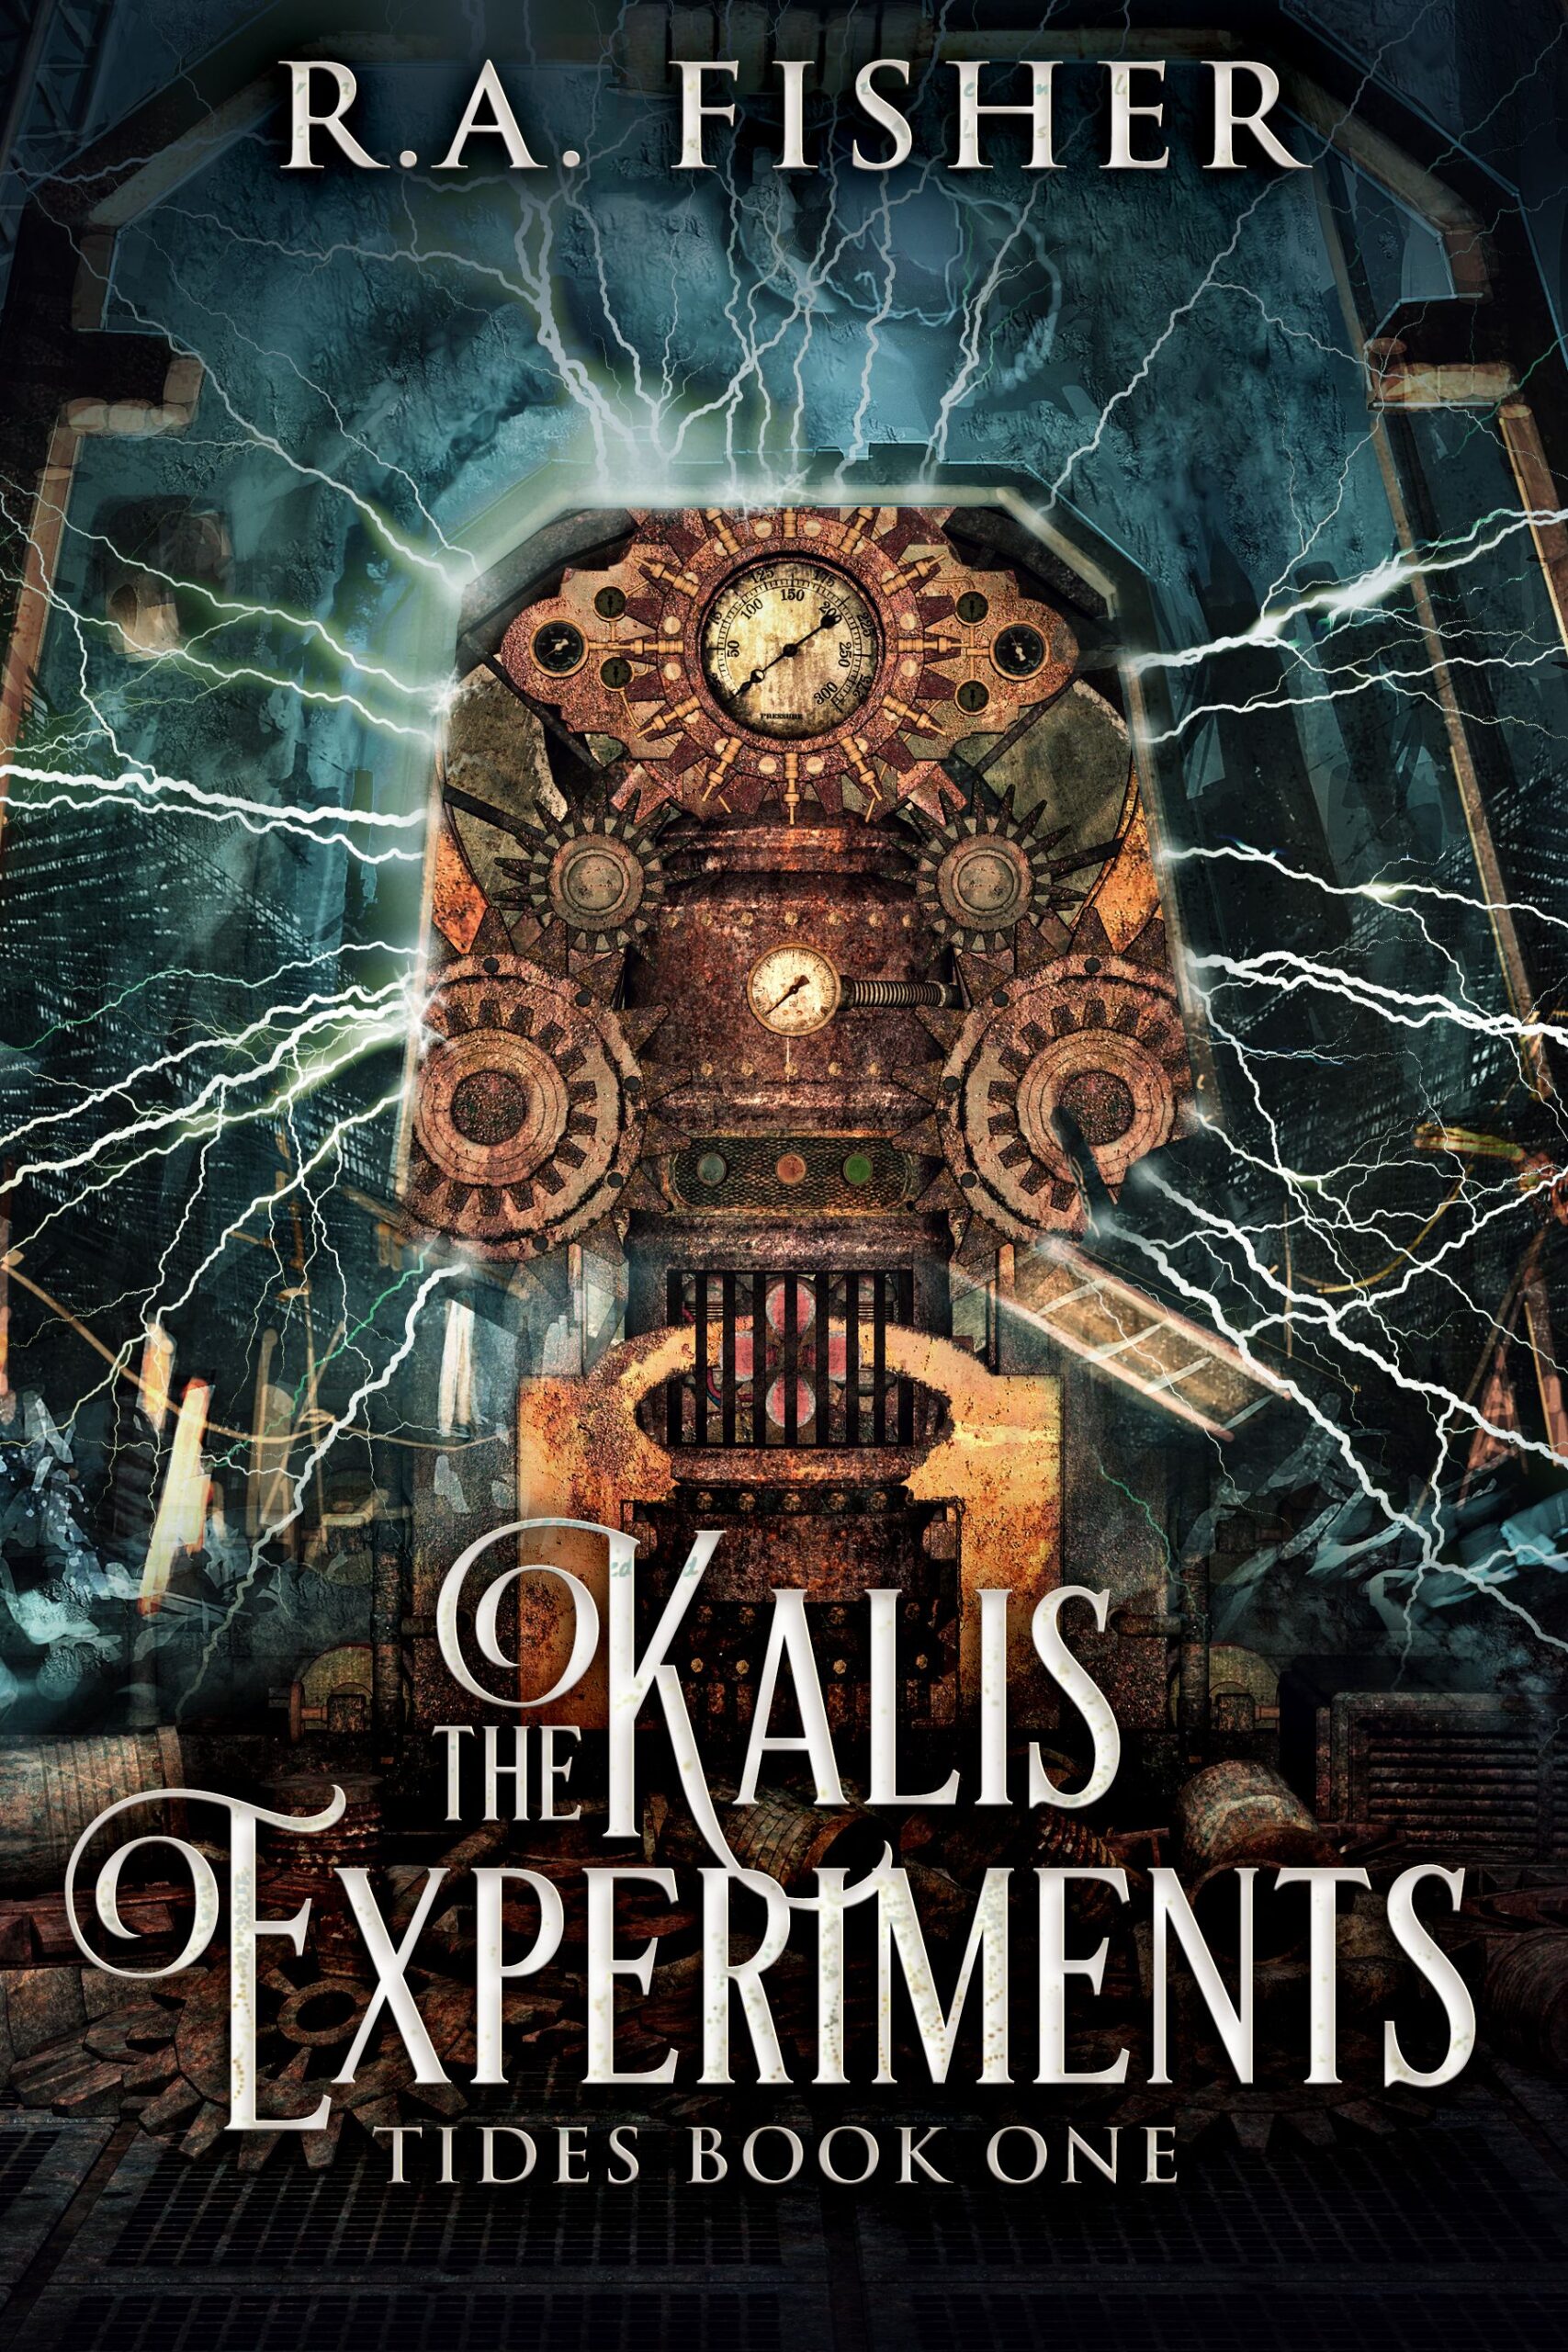 The Kalis Experiments – Chapter 1: The Beginning